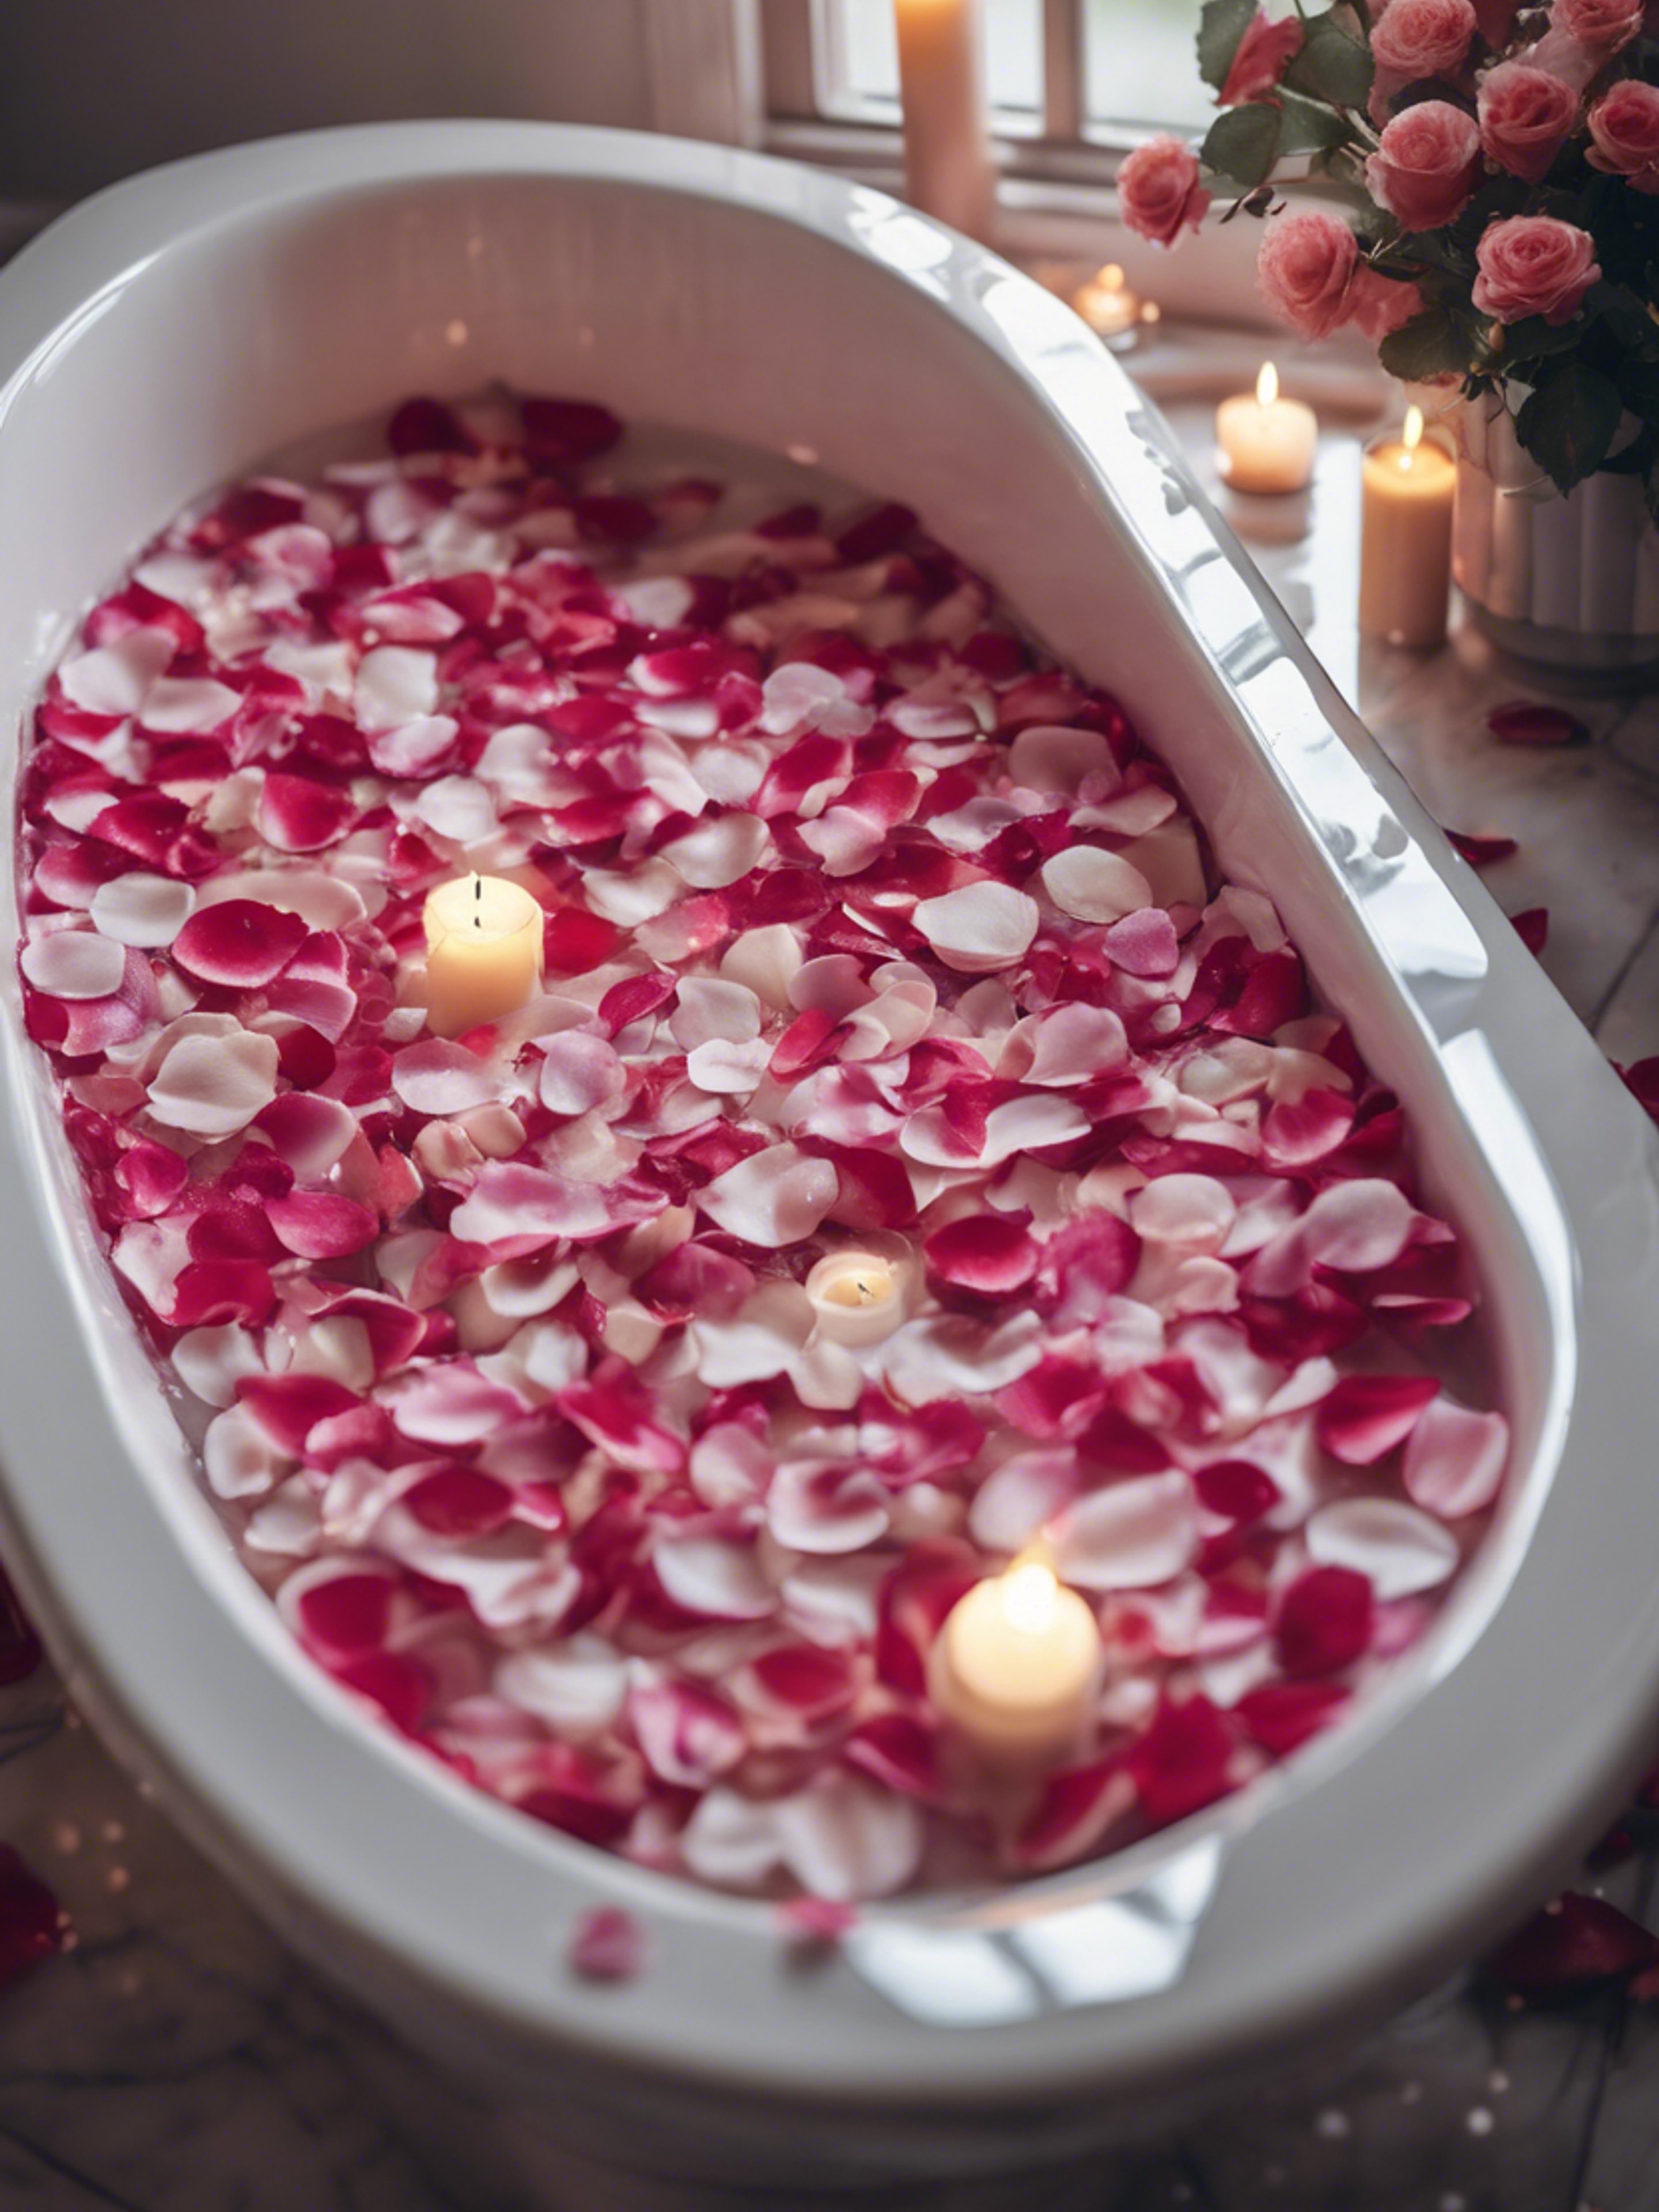 An inviting bubble bath in a white tub with rose petals and candles around the edge of the tub.壁紙[29454076f2ac4acb9df8]